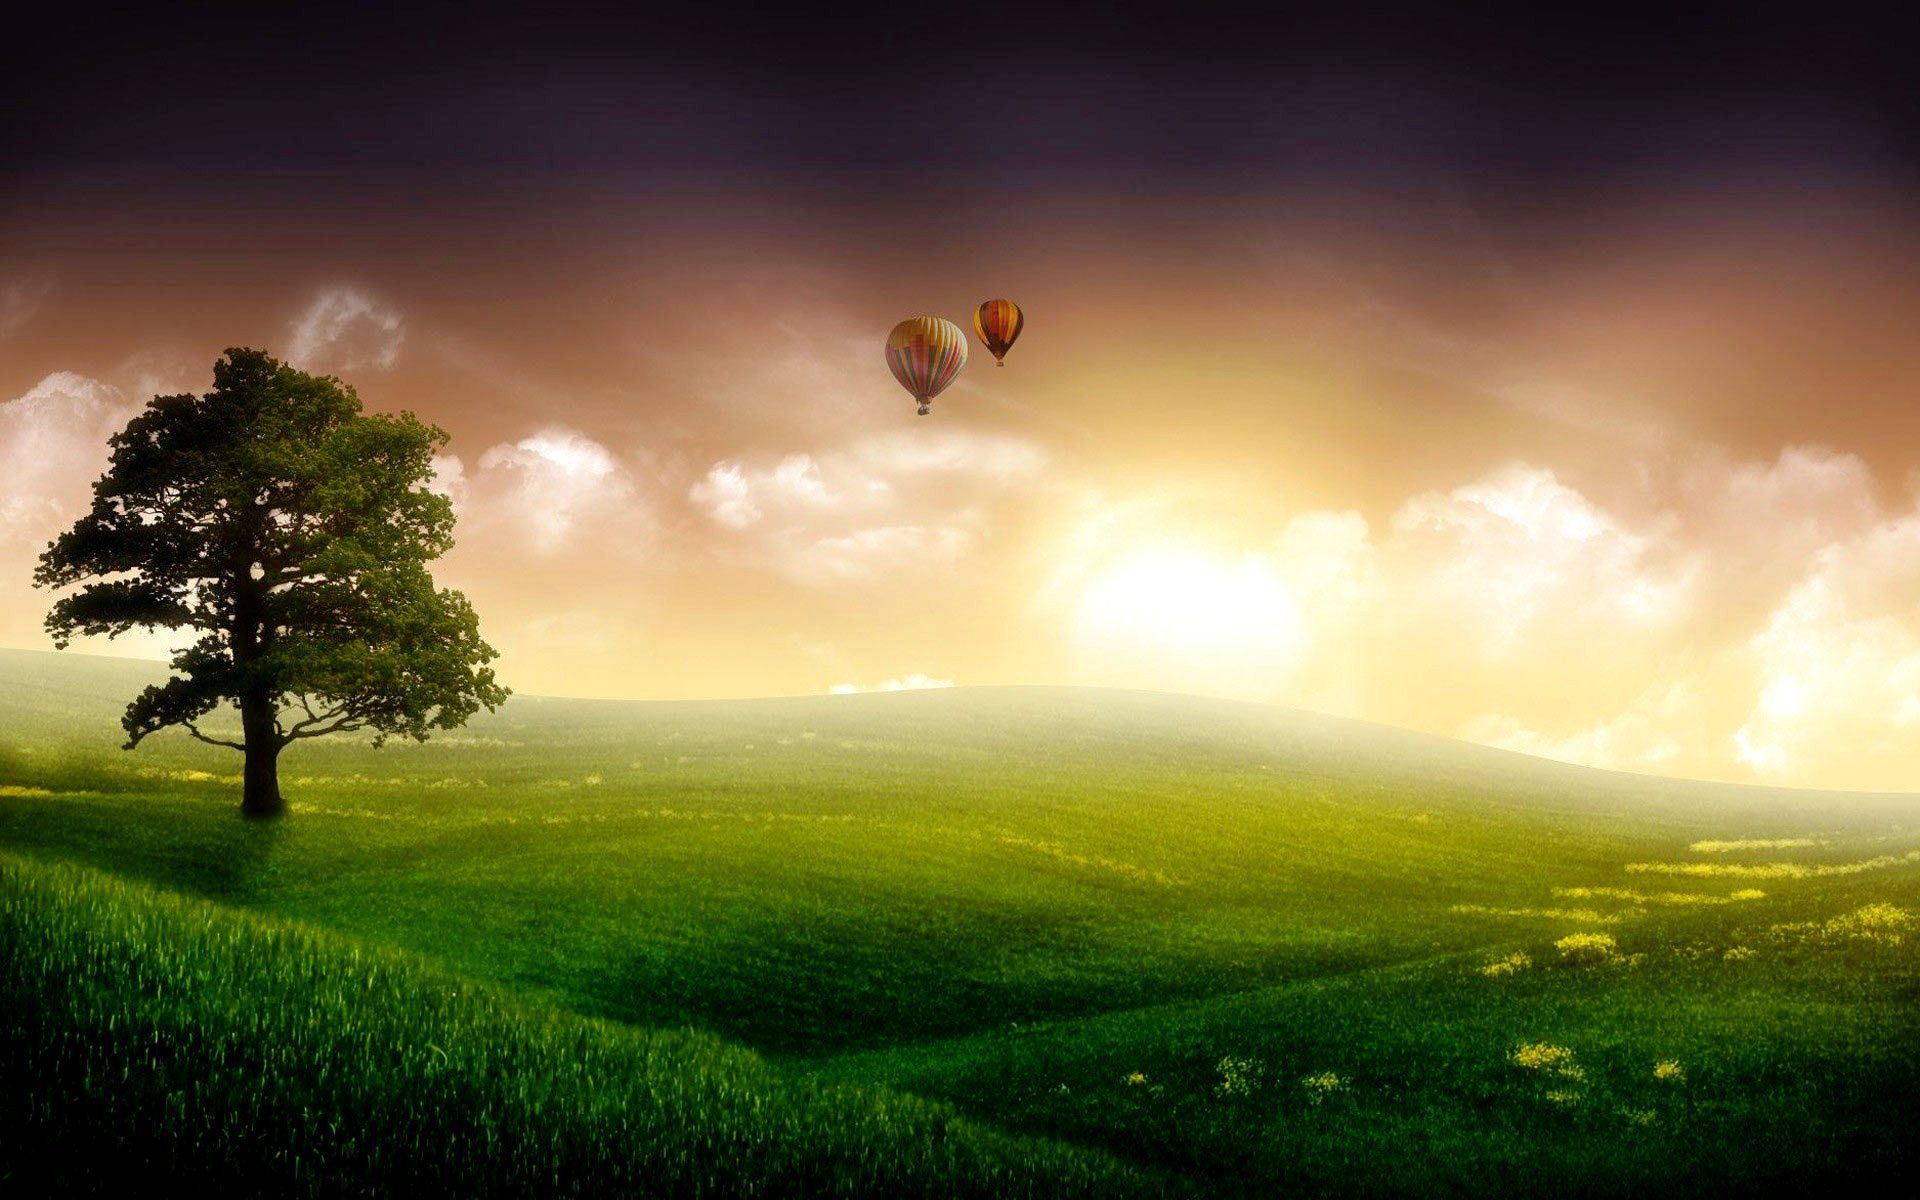 Free Animated Backgrounds For Windows 7 Hot Air Balloons photos of